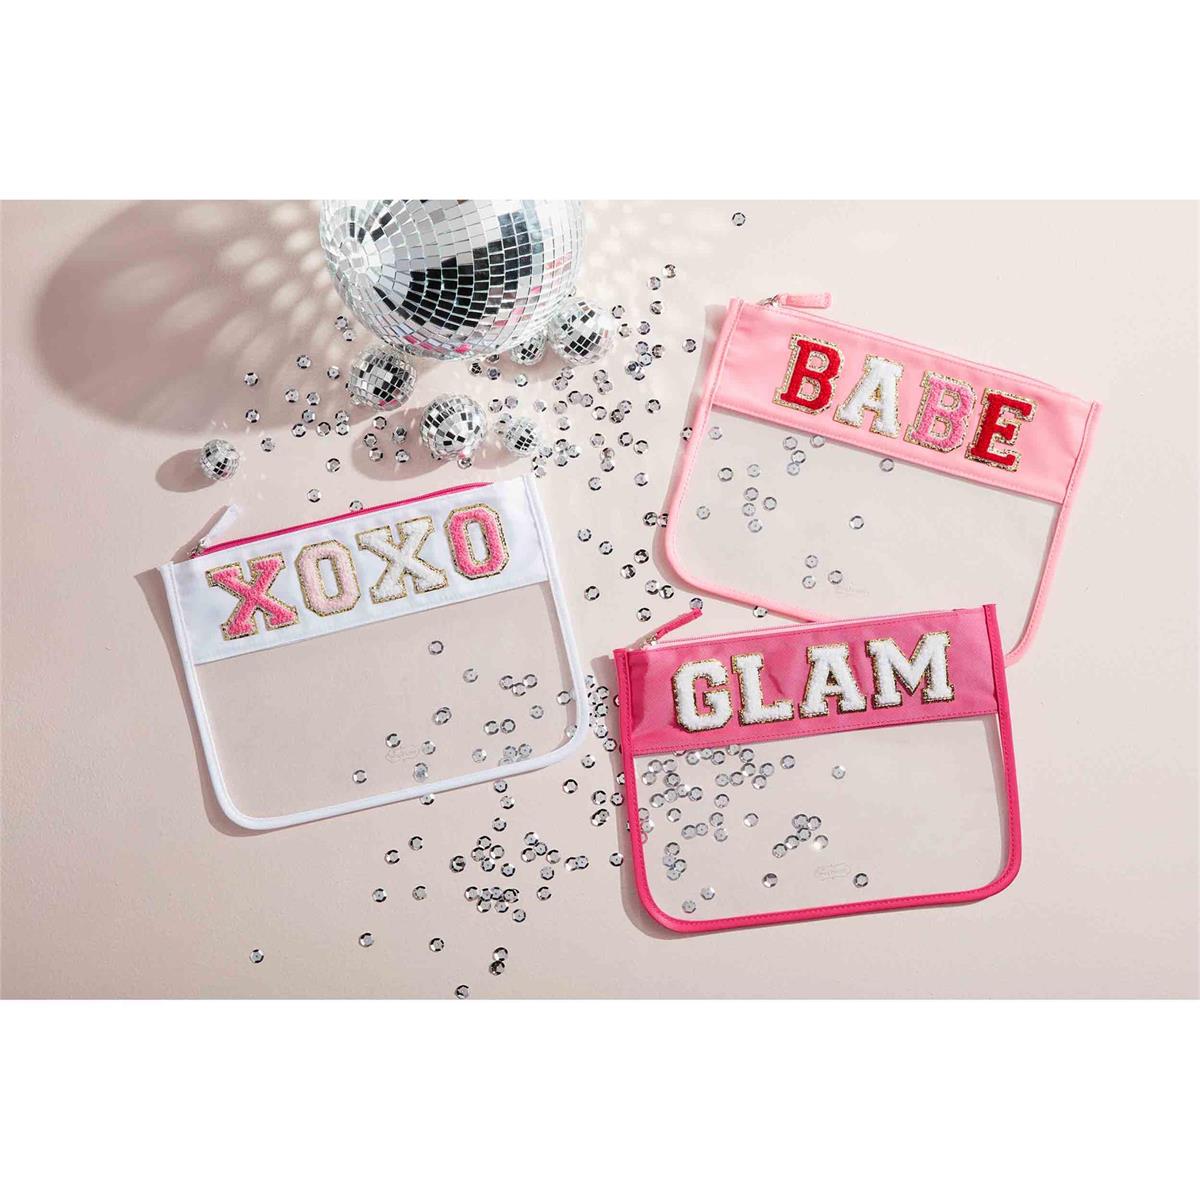 all three styles of clear patch cases displayed next to small disco balls and silver sequins on a light pink background